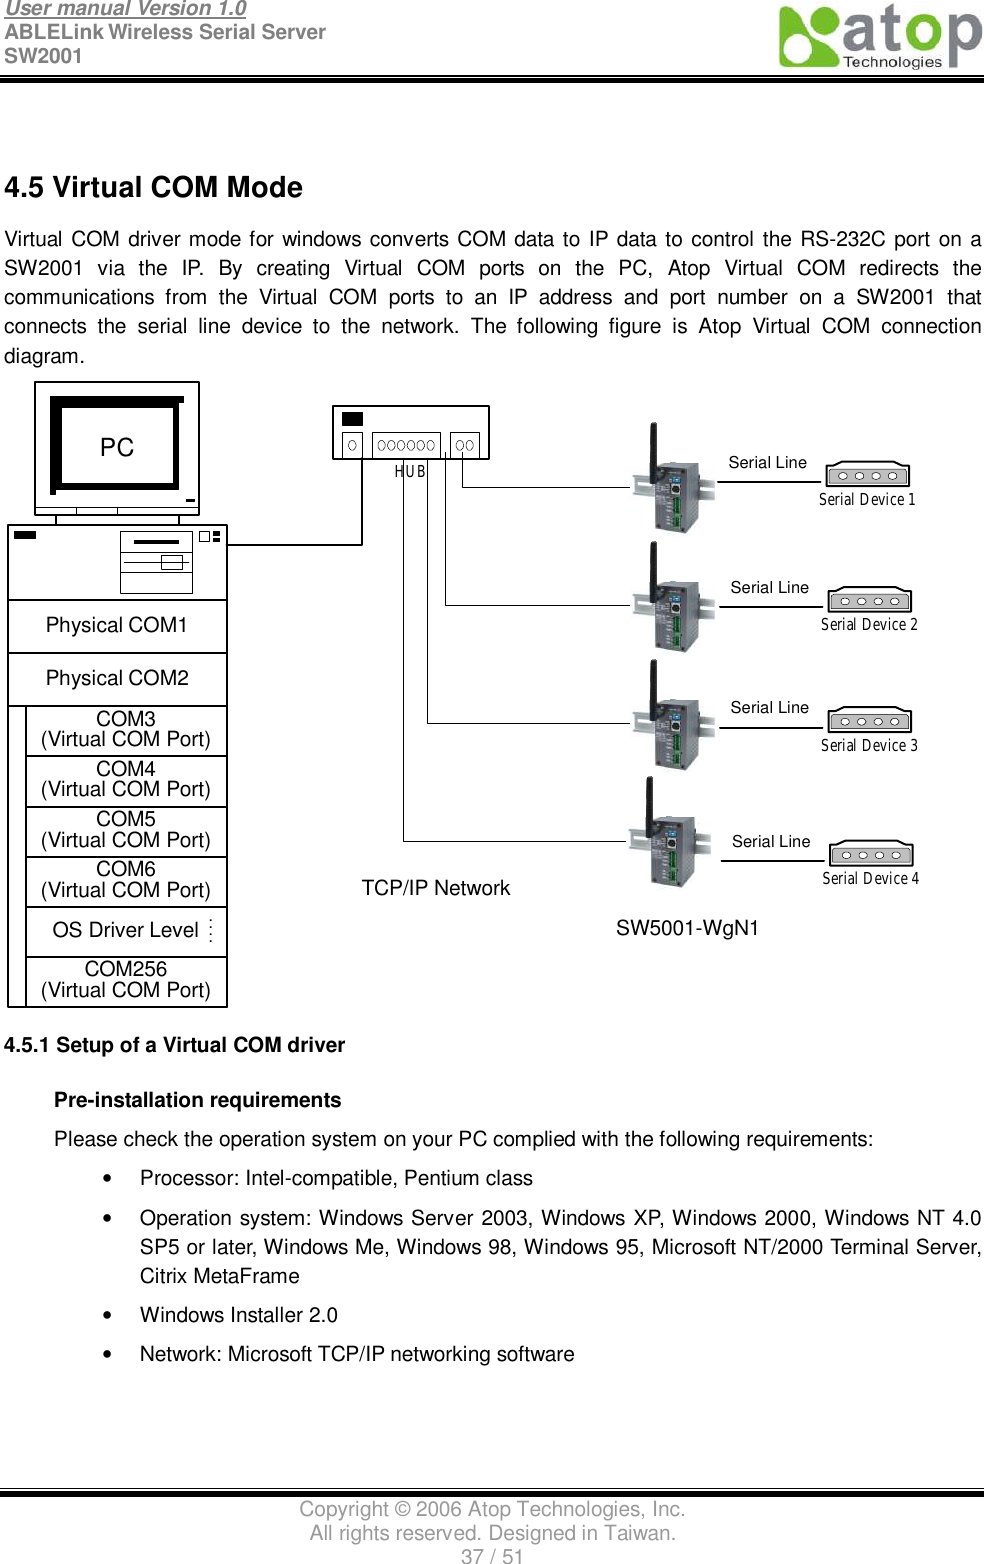 User manual Version 1.0 ABLELink Wireless Serial Server  SW2001                                                                                                                               Copyright © 2006 Atop Technologies, Inc. All rights reserved. Designed in Taiwan. 37 / 51    4.5 Virtual COM Mode Virtual COM driver mode for windows converts COM data to IP data to control the RS-232C port on a SW2001 via the IP. By creating Virtual COM ports on the PC, Atop Virtual COM redirects the communications from the Virtual COM ports to an IP address and port number on a SW2001 that connects the serial line device to the network. The following figure is Atop Virtual COM connection diagram. Physical COM1Physical COM2COM3(Virtual COM Port)COM4(Virtual COM Port)COM5(Virtual COM Port)COM6(Virtual COM Port)OS Driver LevelCOM256(Virtual COM Port)PC::HUBTCP/IP NetworkSerial LineSerial Device 1Serial LineSerial Device 2Serial LineSerial Device 3Serial LineSerial Device 4SW5001-WgN1 4.5.1 Setup of a Virtual COM driver Pre-installation requirements  Please check the operation system on your PC complied with the following requirements: •  Processor: Intel-compatible, Pentium class •  Operation system: Windows Server 2003, Windows XP, Windows 2000, Windows NT 4.0 SP5 or later, Windows Me, Windows 98, Windows 95, Microsoft NT/2000 Terminal Server, Citrix MetaFrame •  Windows Installer 2.0 •  Network: Microsoft TCP/IP networking software 